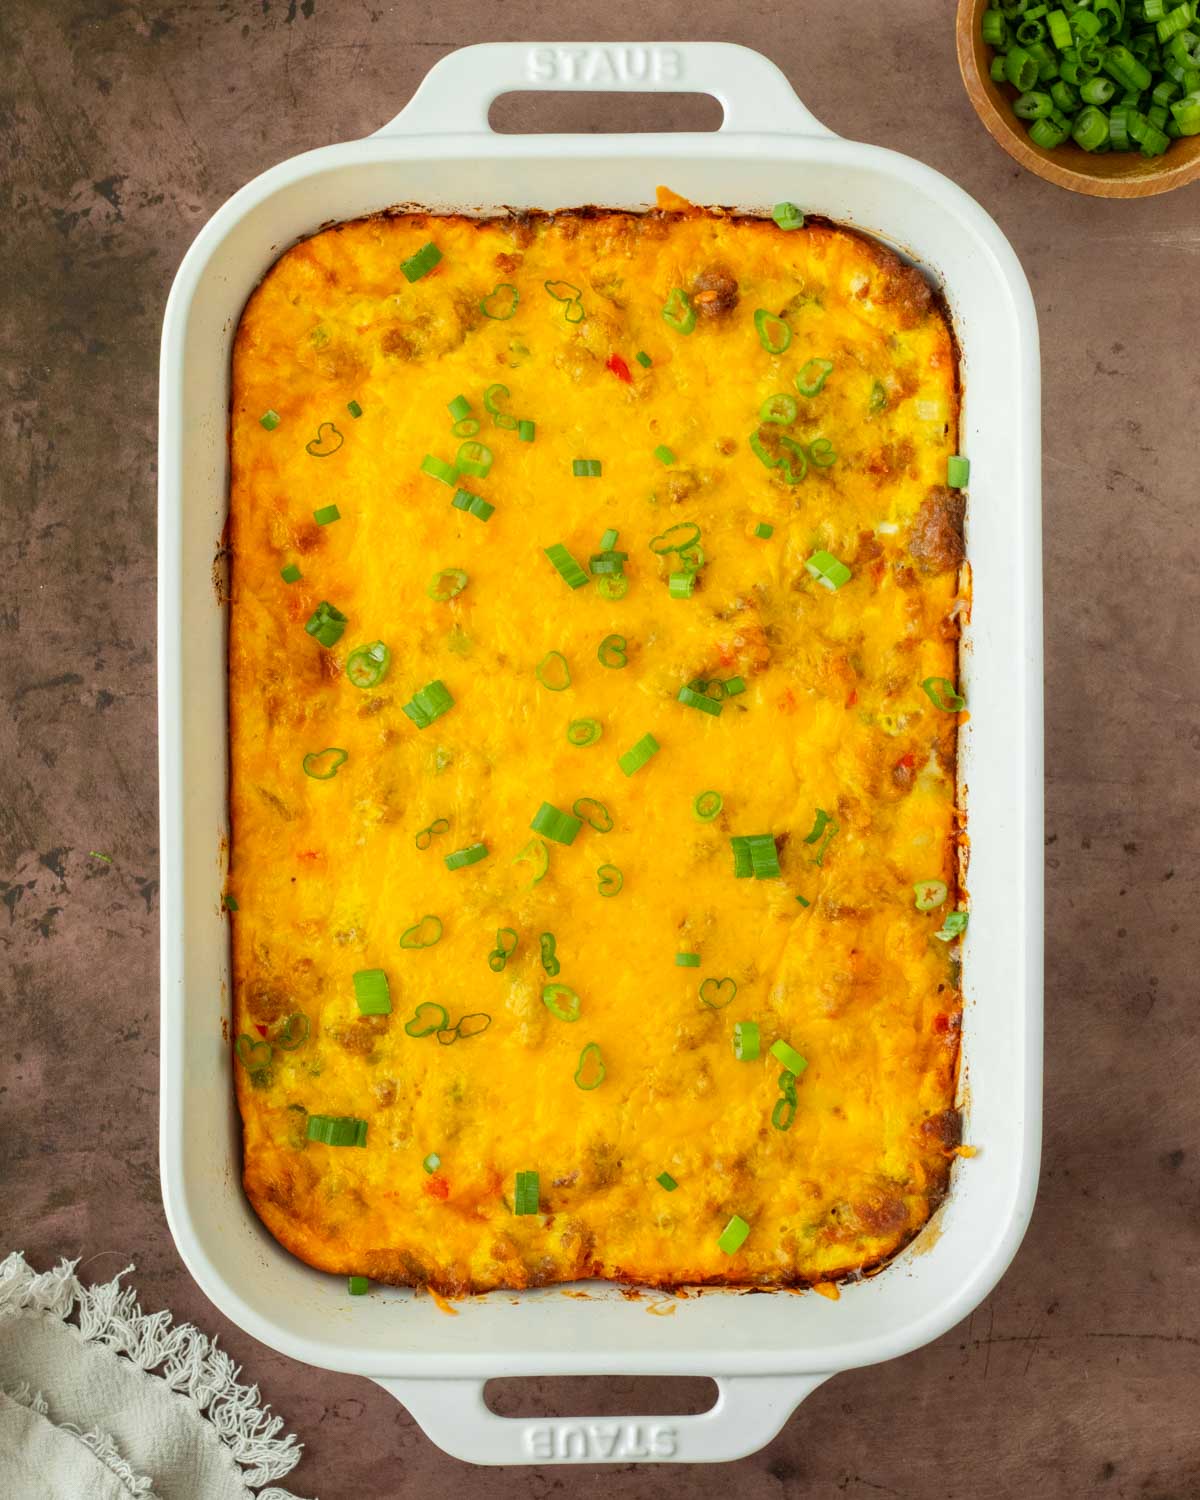 This breakfast casserole is a hearty and delicious breakfast recipe made filled with eggs, sausage, and potatoes for a filling and flavorful meal. We love making this recipe for a holiday breakfast recipe and it is also a great meal prep breakfast.